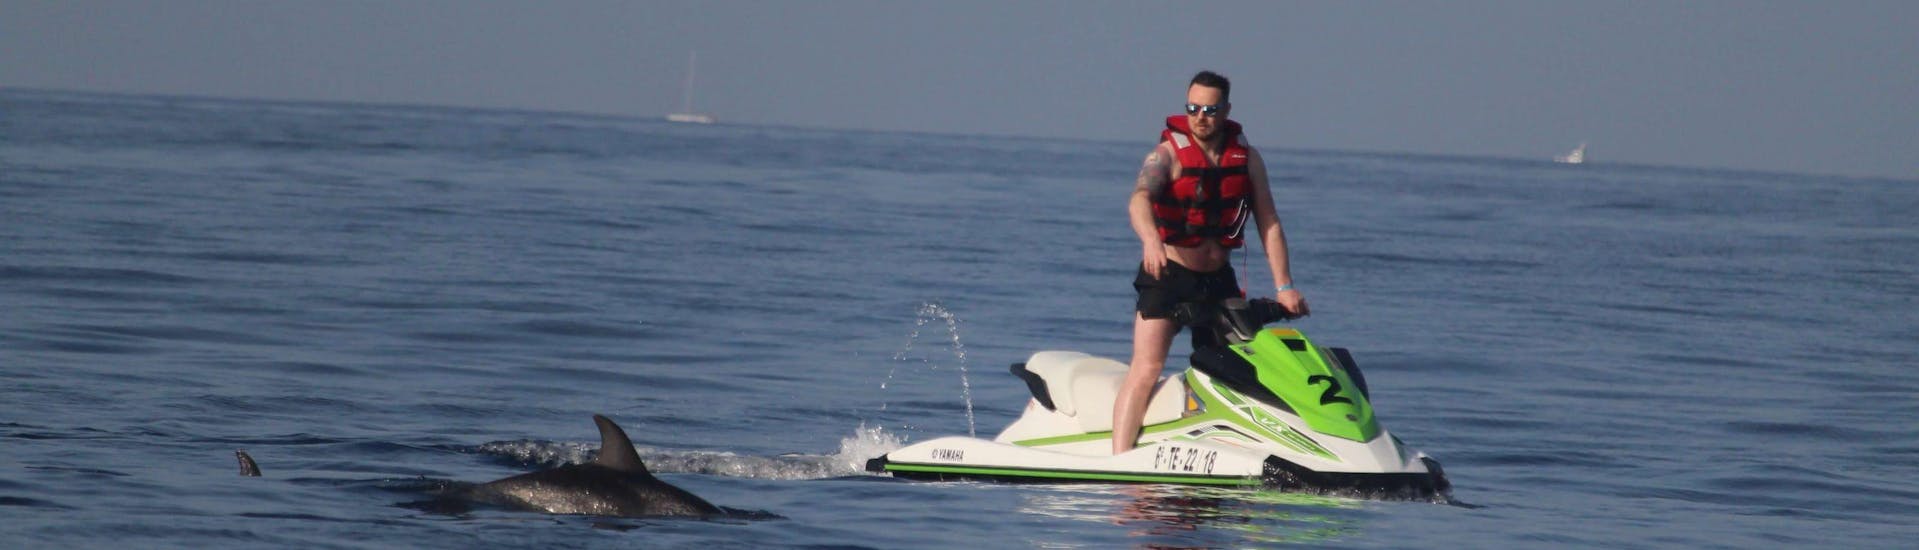 A person goes on a jet ski safari to El Palm Mar with Extreme Skis Tenerife. 